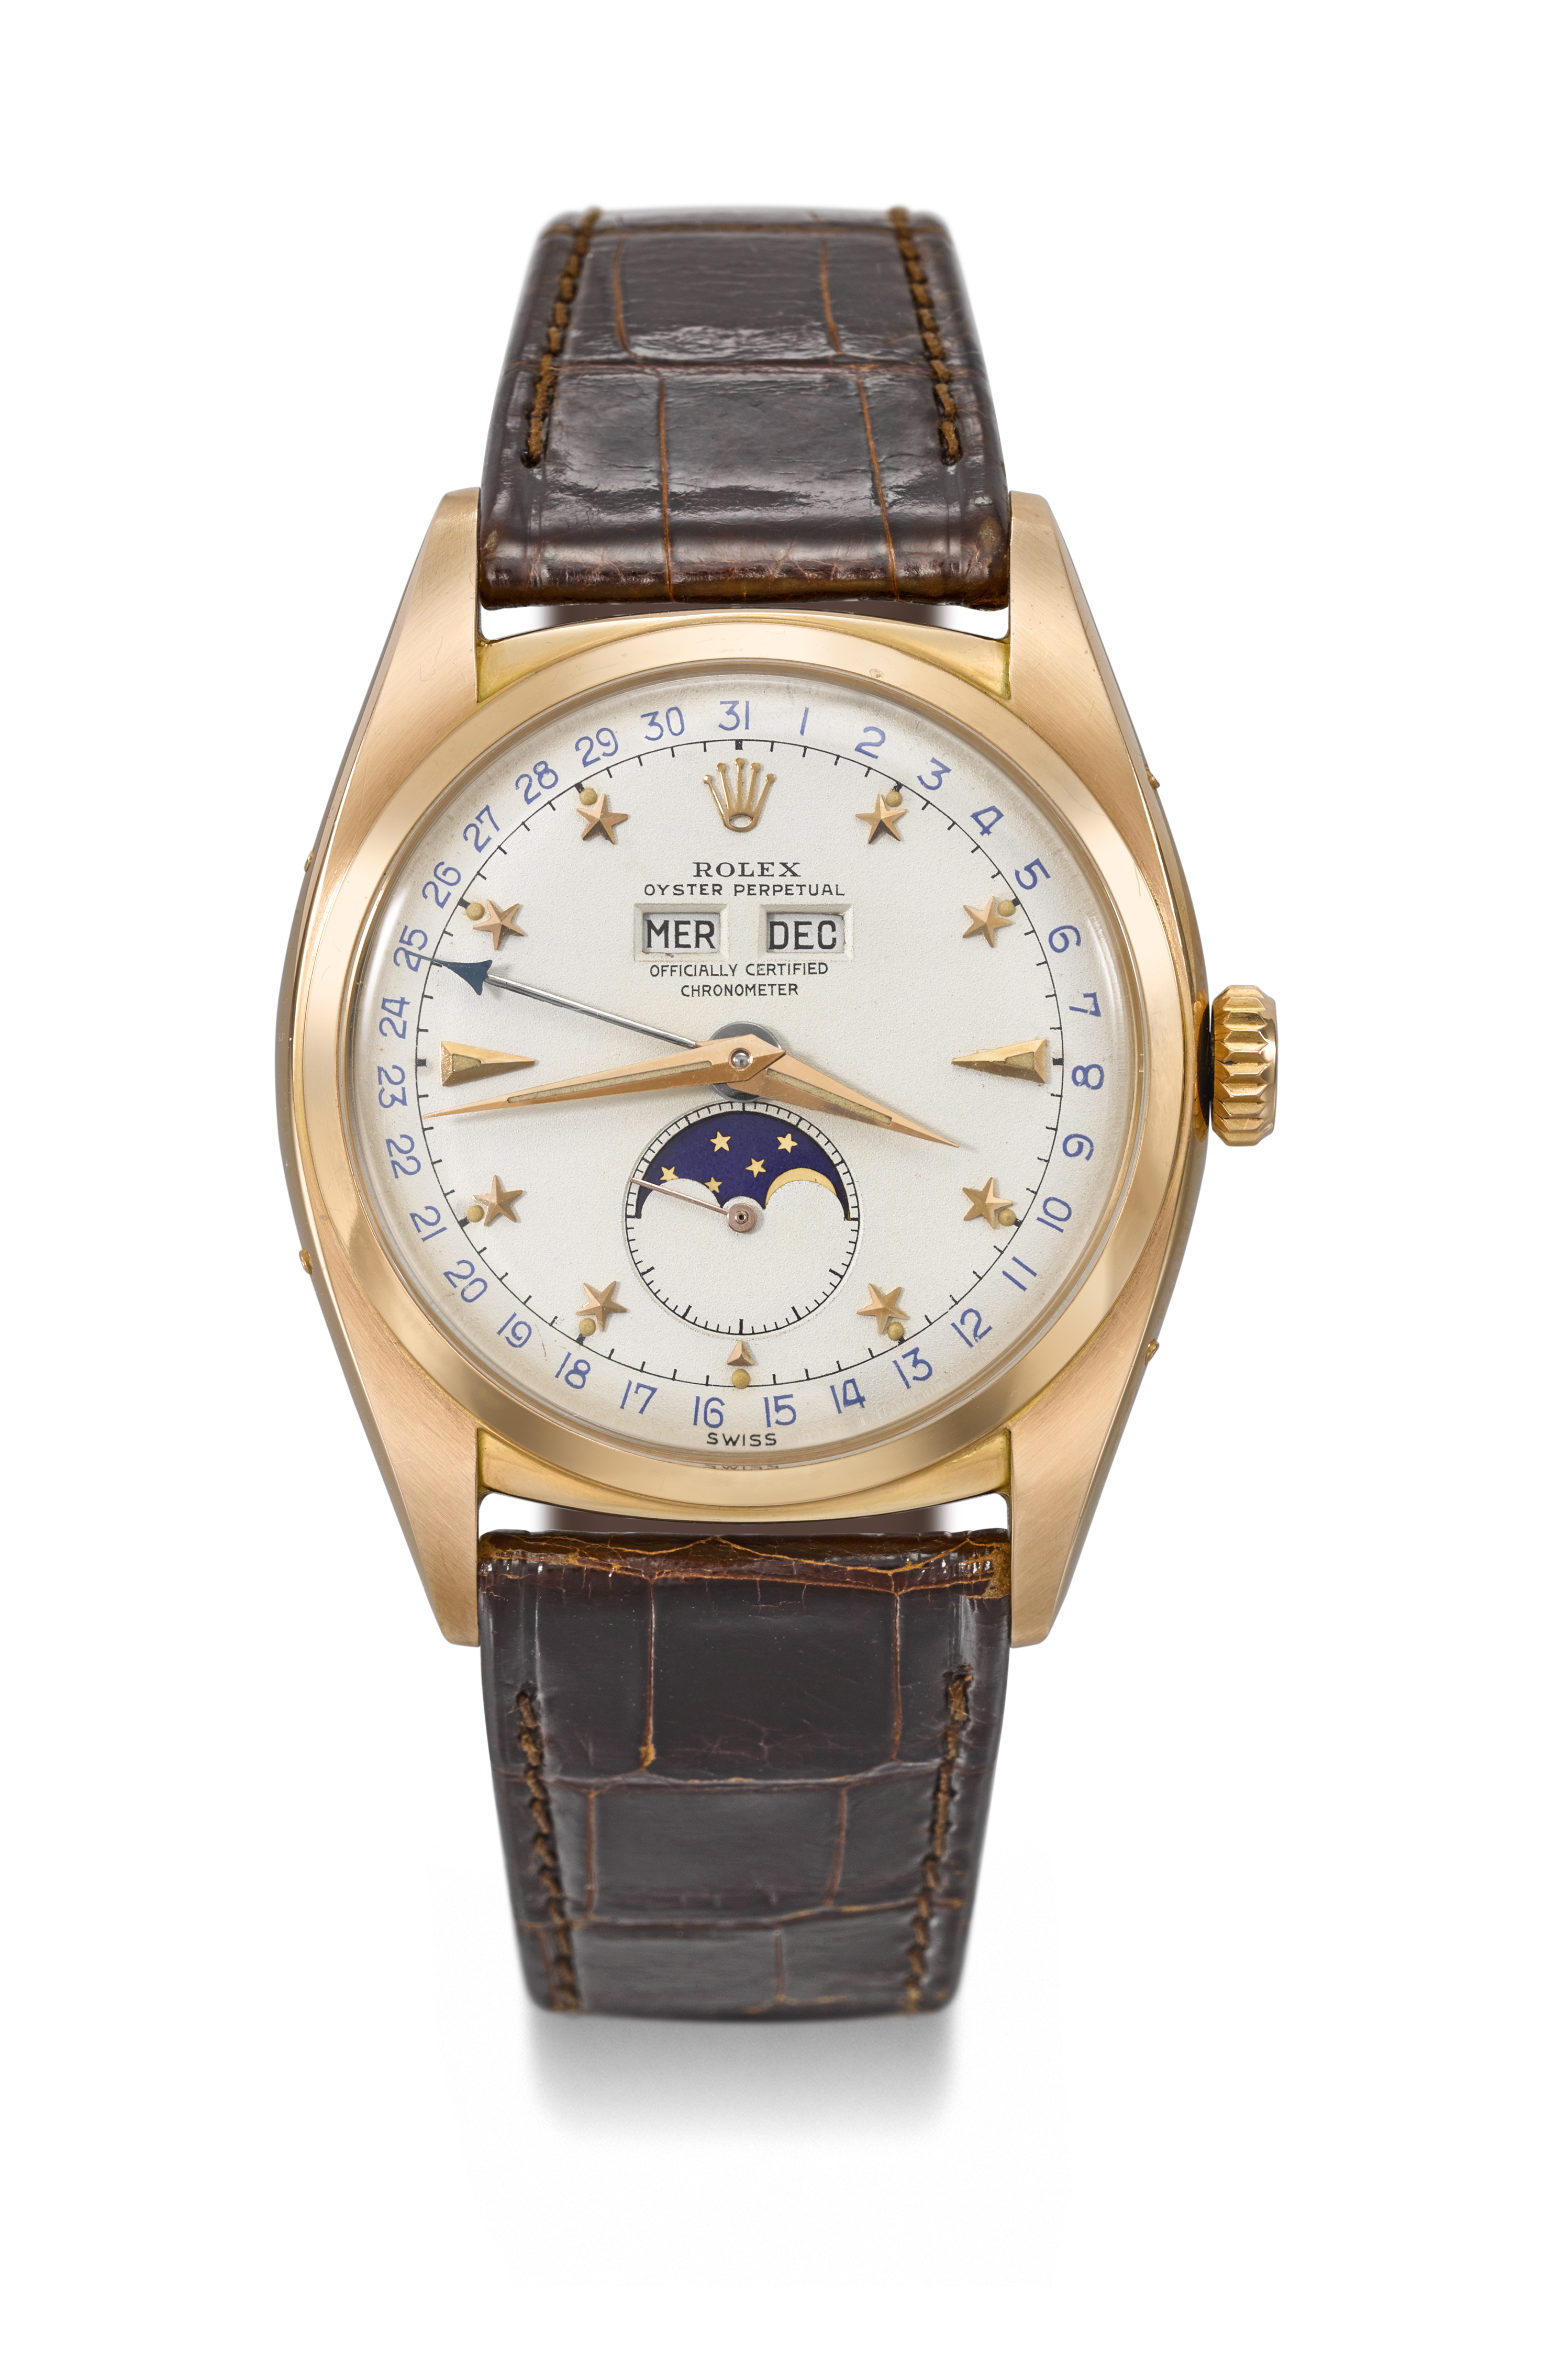 Saving the best for last, the 36mm pink gold Rolex reference 6062 “Stelline” triple calendar with moon phase and, most notably, the celebrated star dial, is one of only two Rolex models from the period to feature the said complication. 